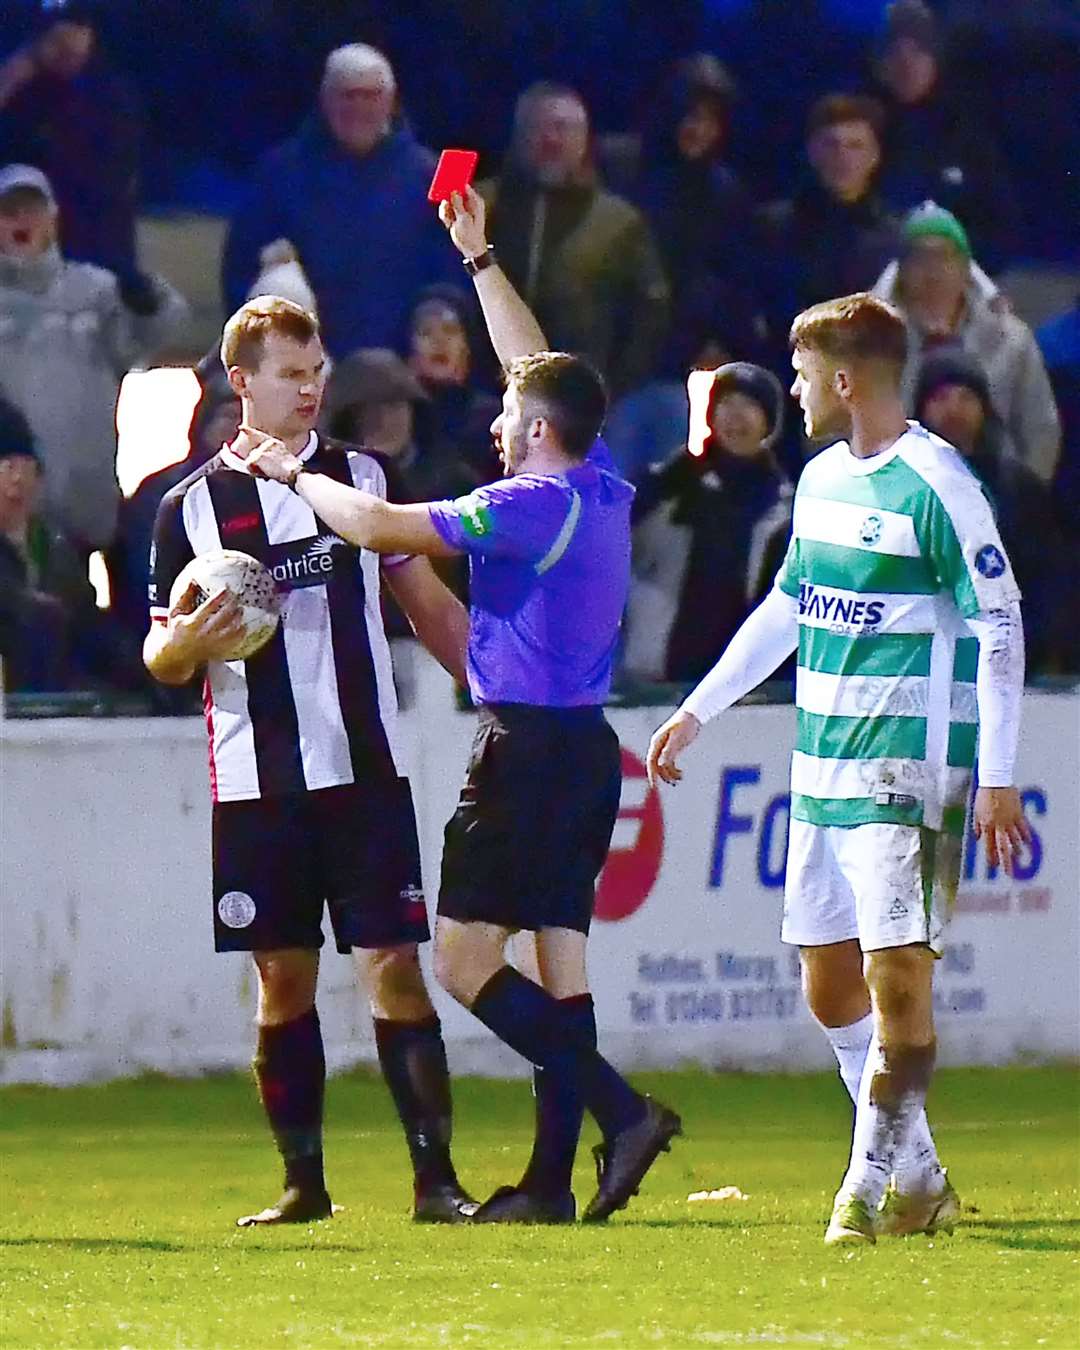 Wick Academy's Owen Rendall looks perplexed as referee Harry Bruce brandishes the red card at Victoria Park on Saturday. Picture: Mel Roger